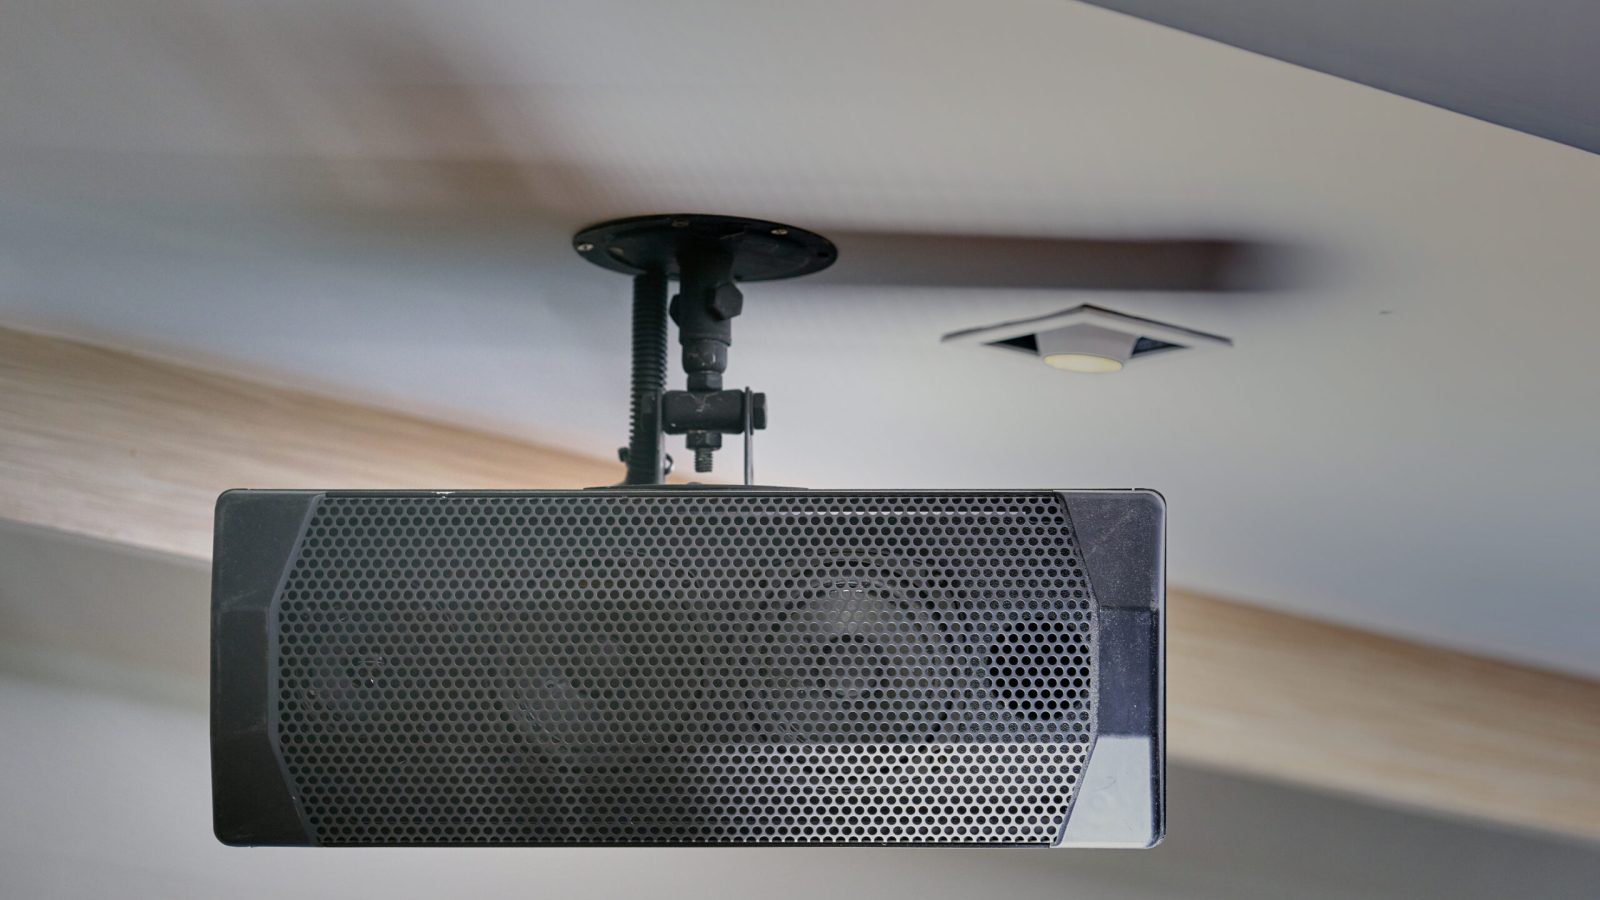 Enhance your office environment with state-of-the-art audio solutions. Experience the clarity of sound from strategically positioned overhead speakers. Serving Des Moines, Ankeny, and all of Iowa.